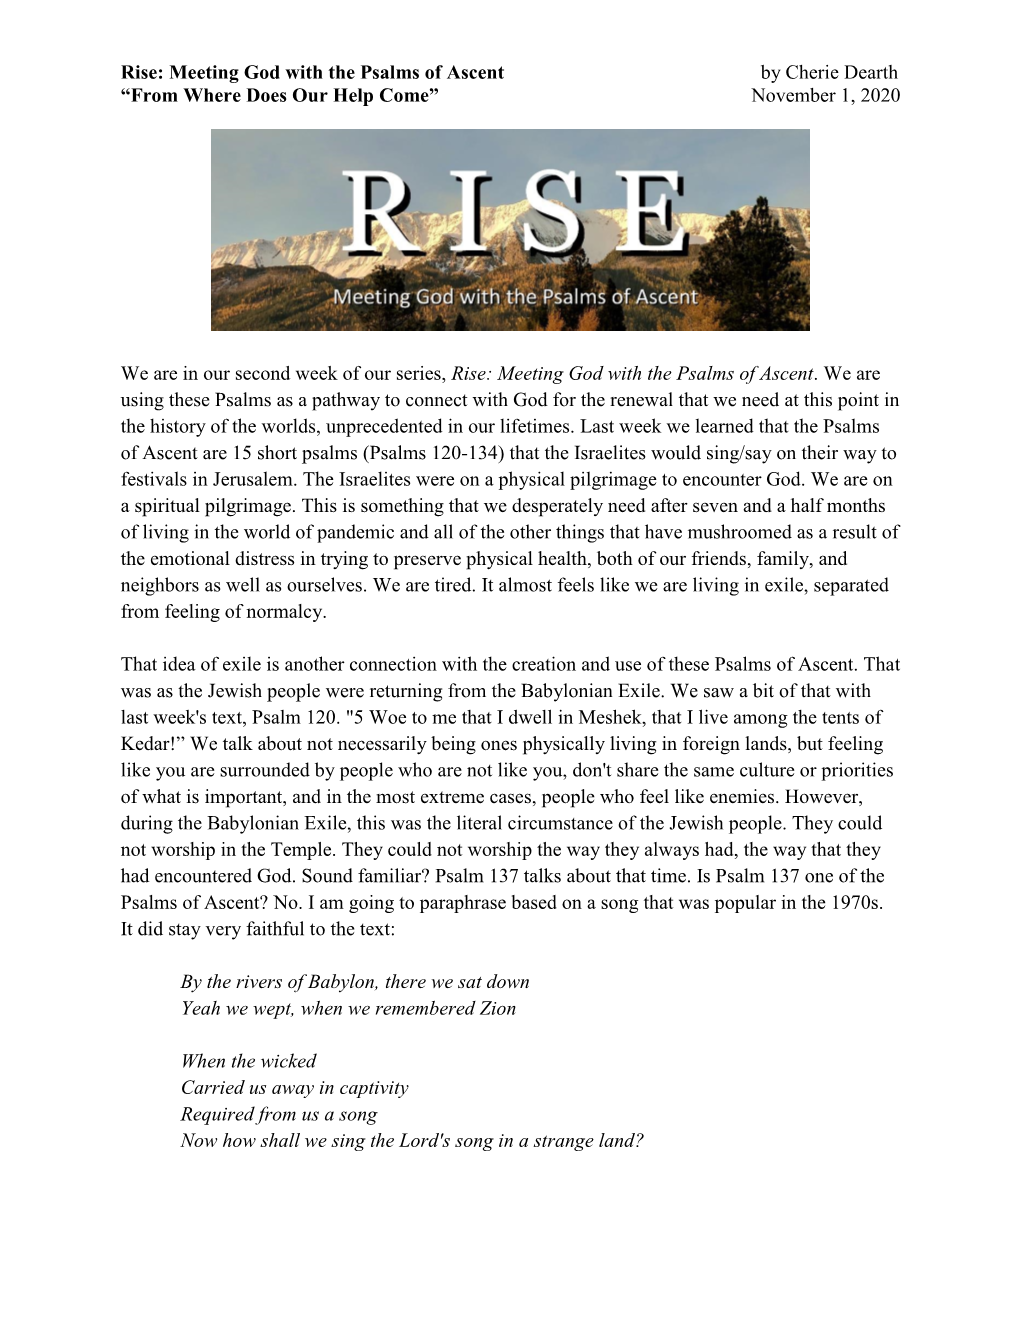 Rise: Meeting God with the Psalms of Ascent by Cherie Dearth “From Where Does Our Help Come” November 1, 2020